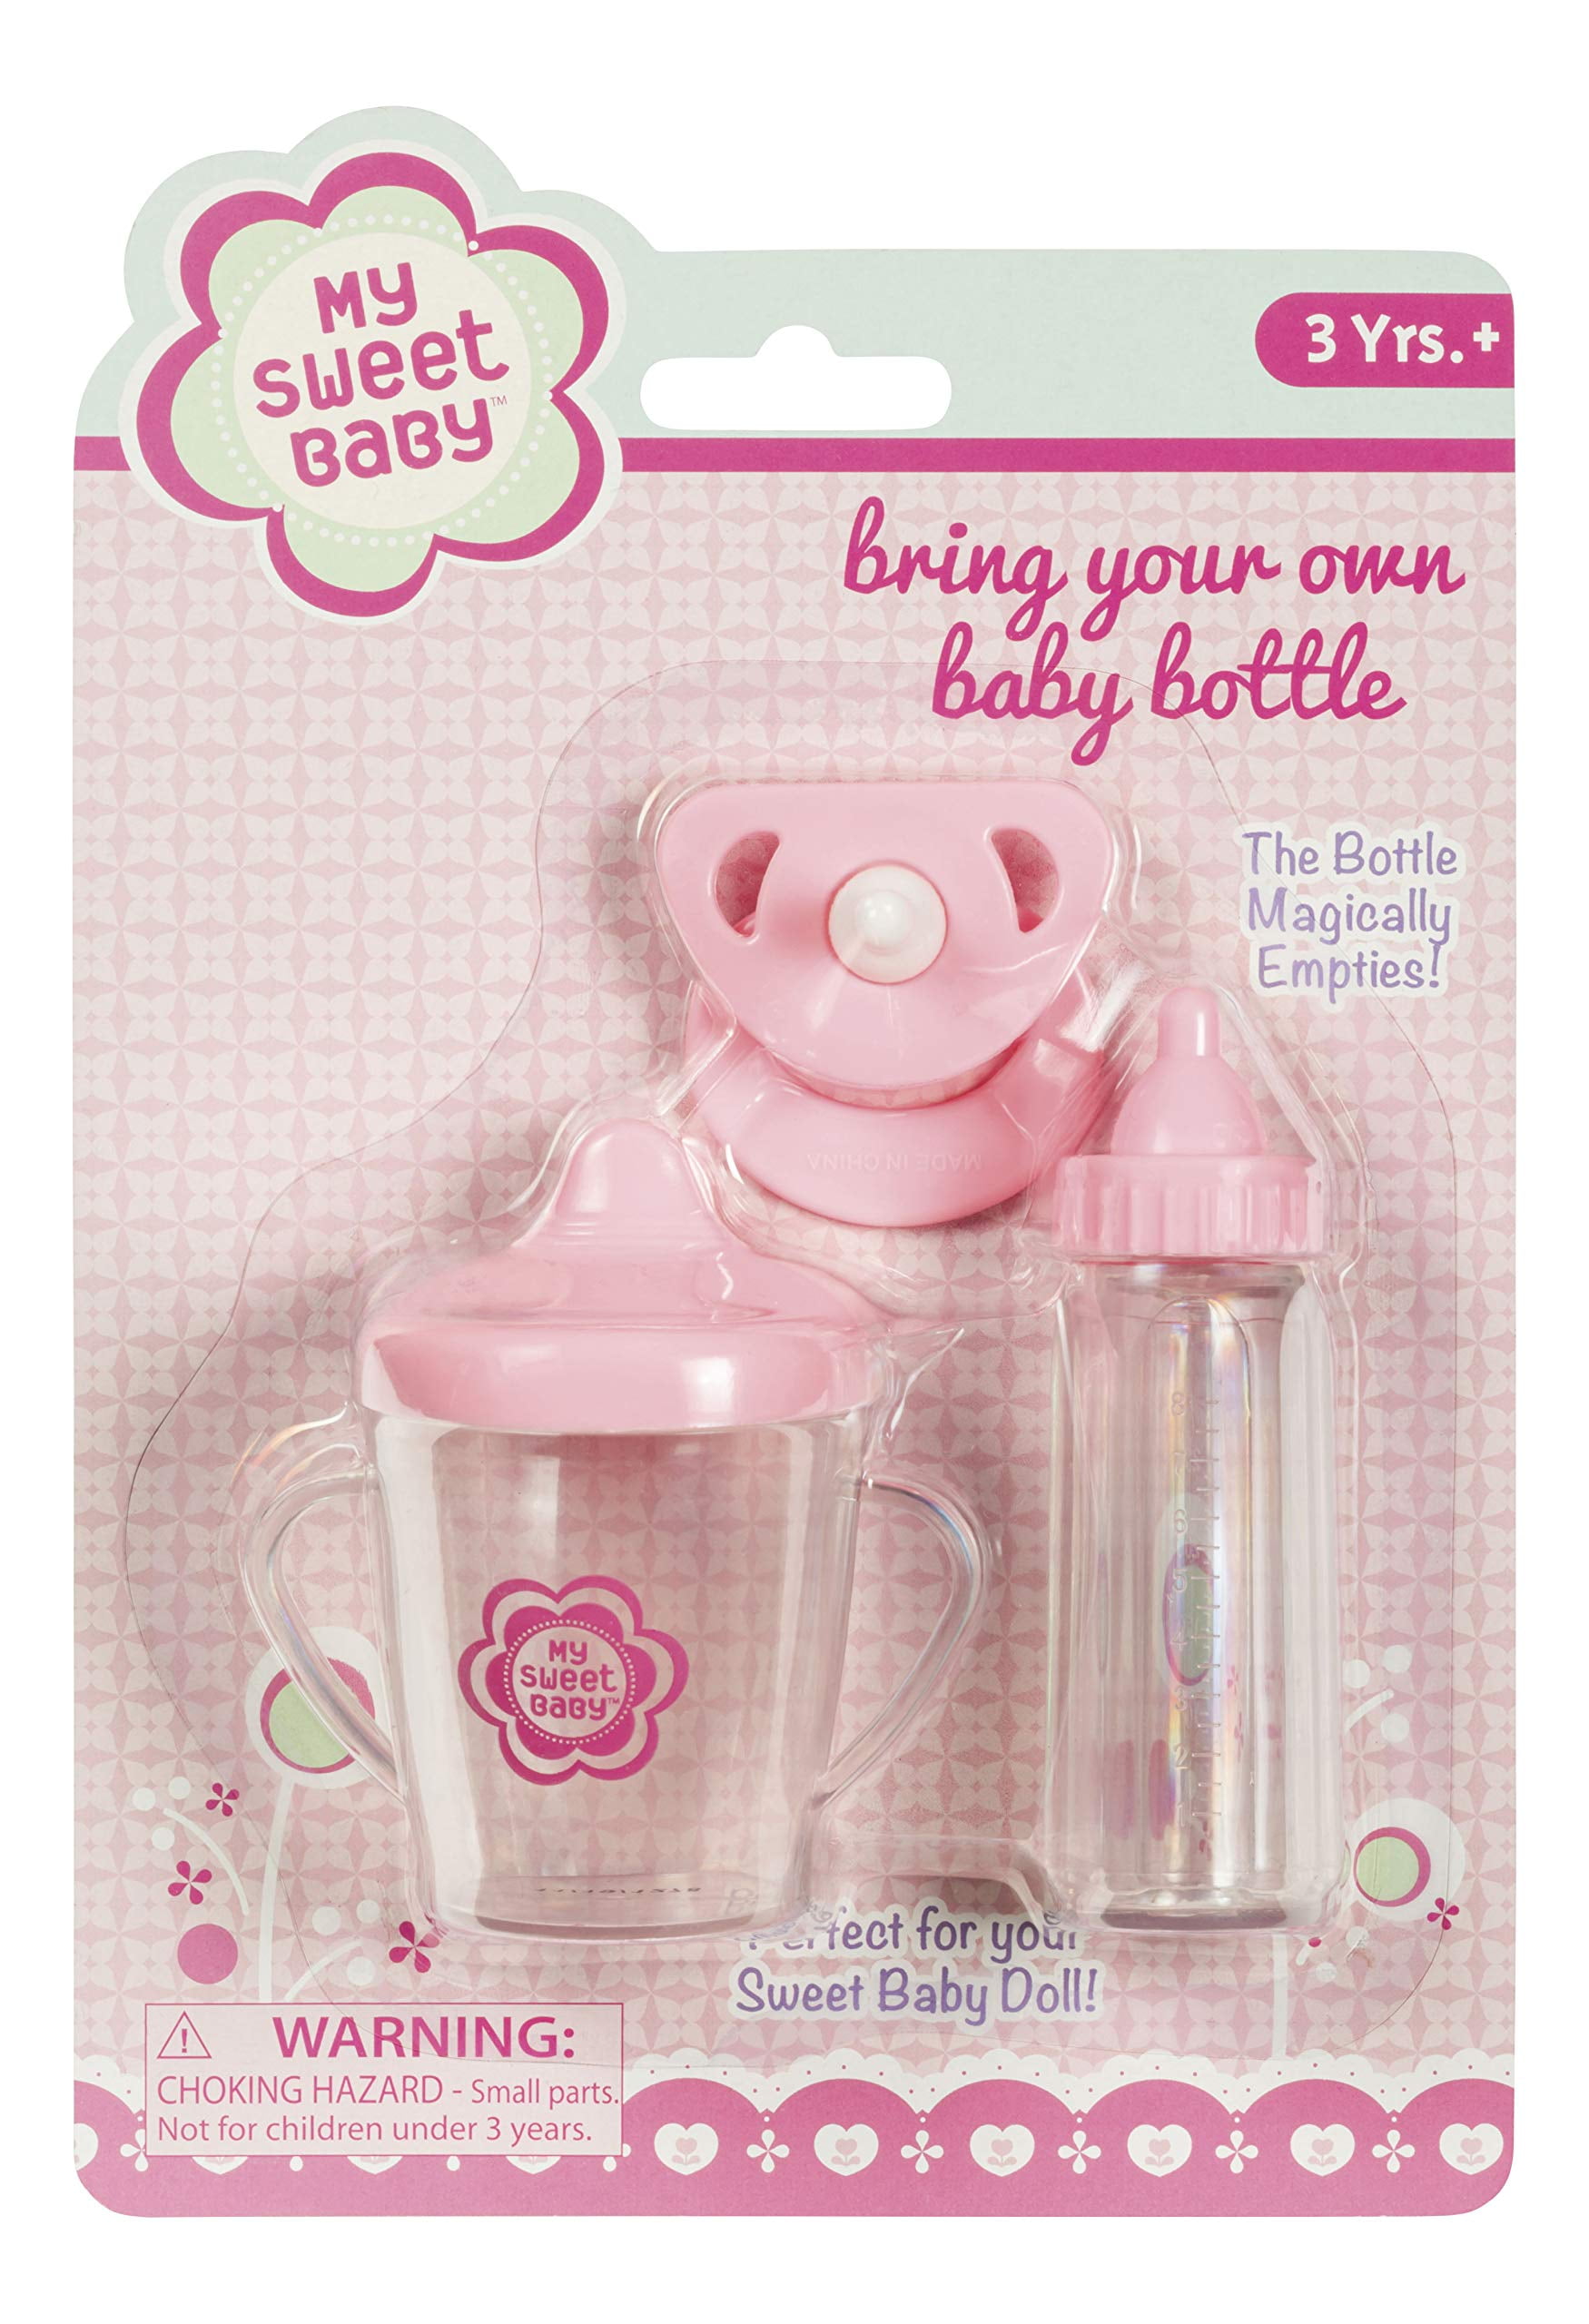 Reborn Baby Doll Pink Feeding Bottle for Kids Toys Girl Doll Accessories